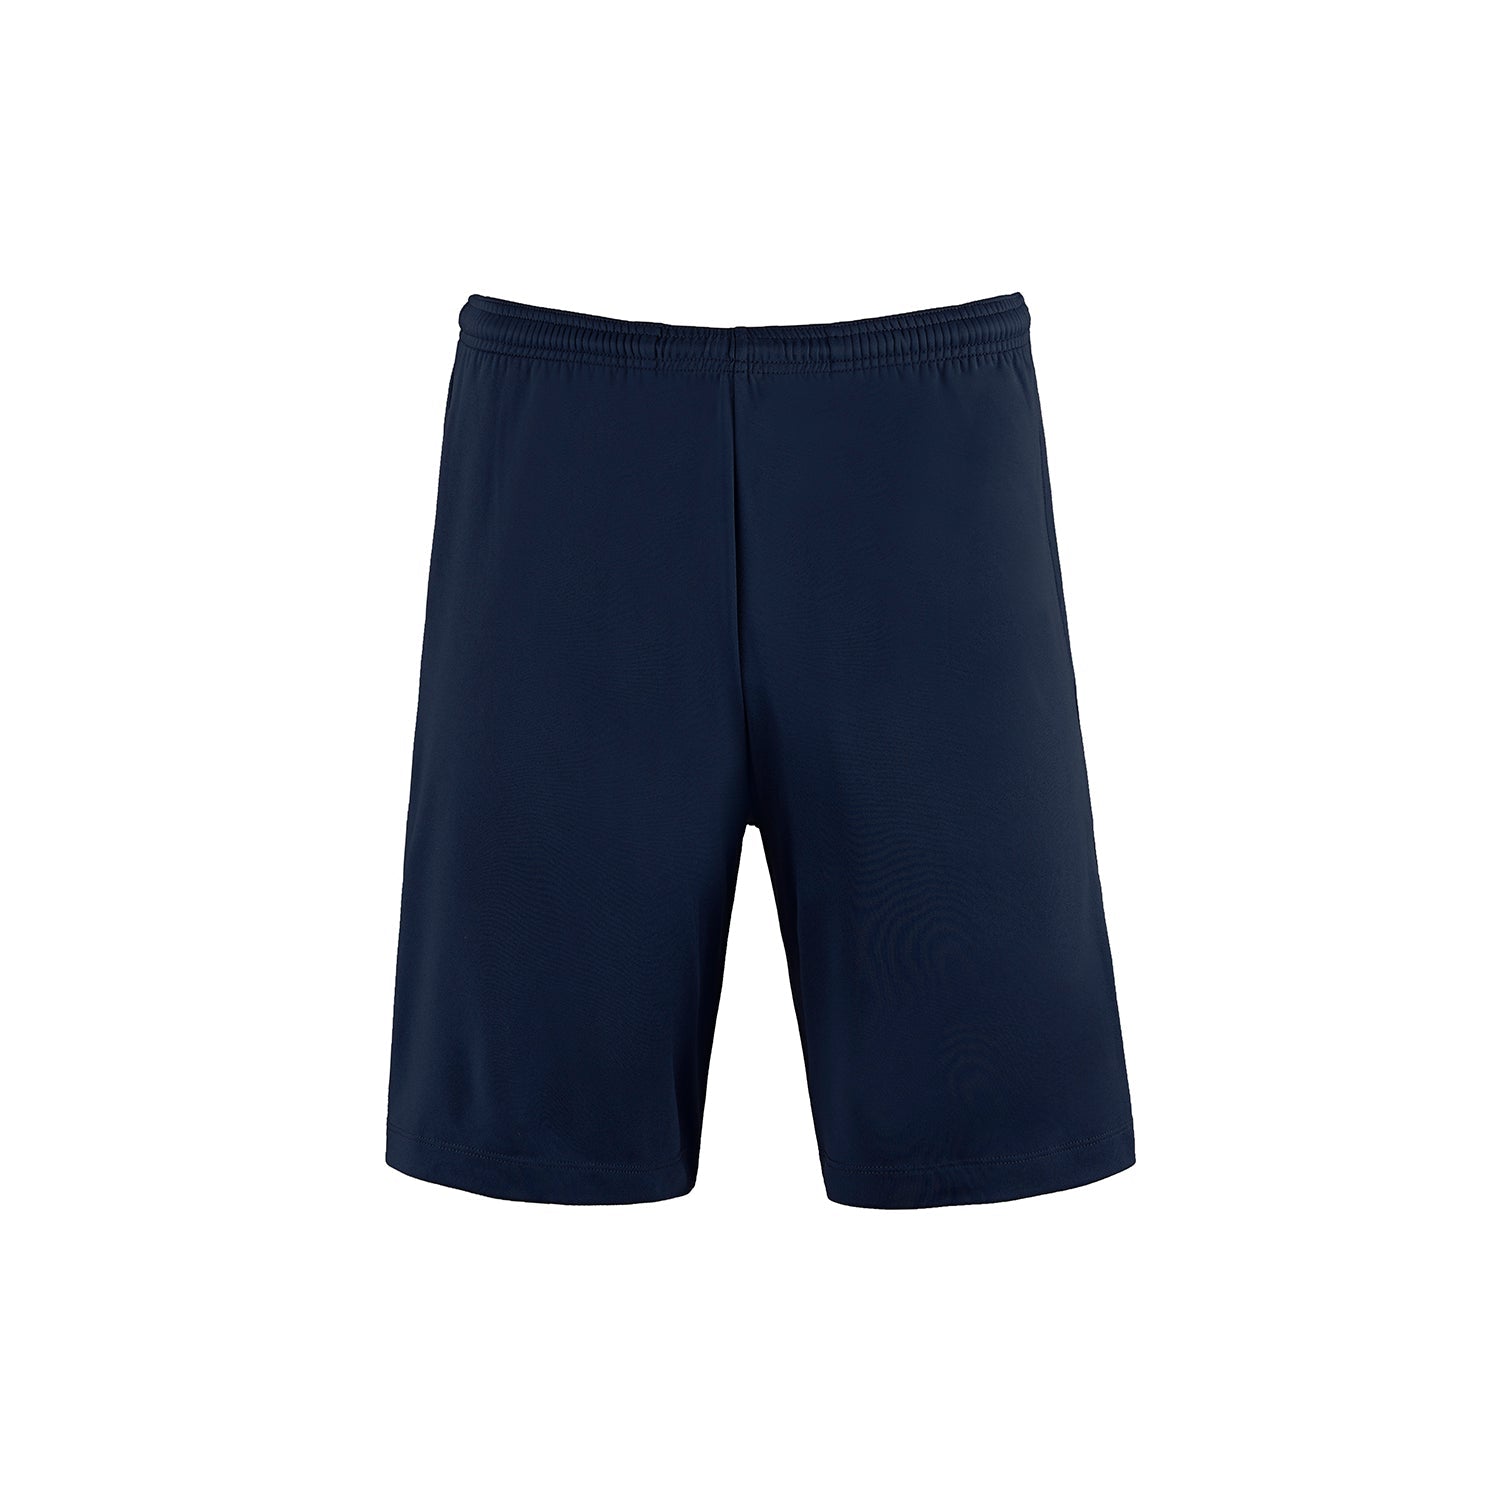 P4475Y - Wave - Youth Athletic Short with Pockets - Navy